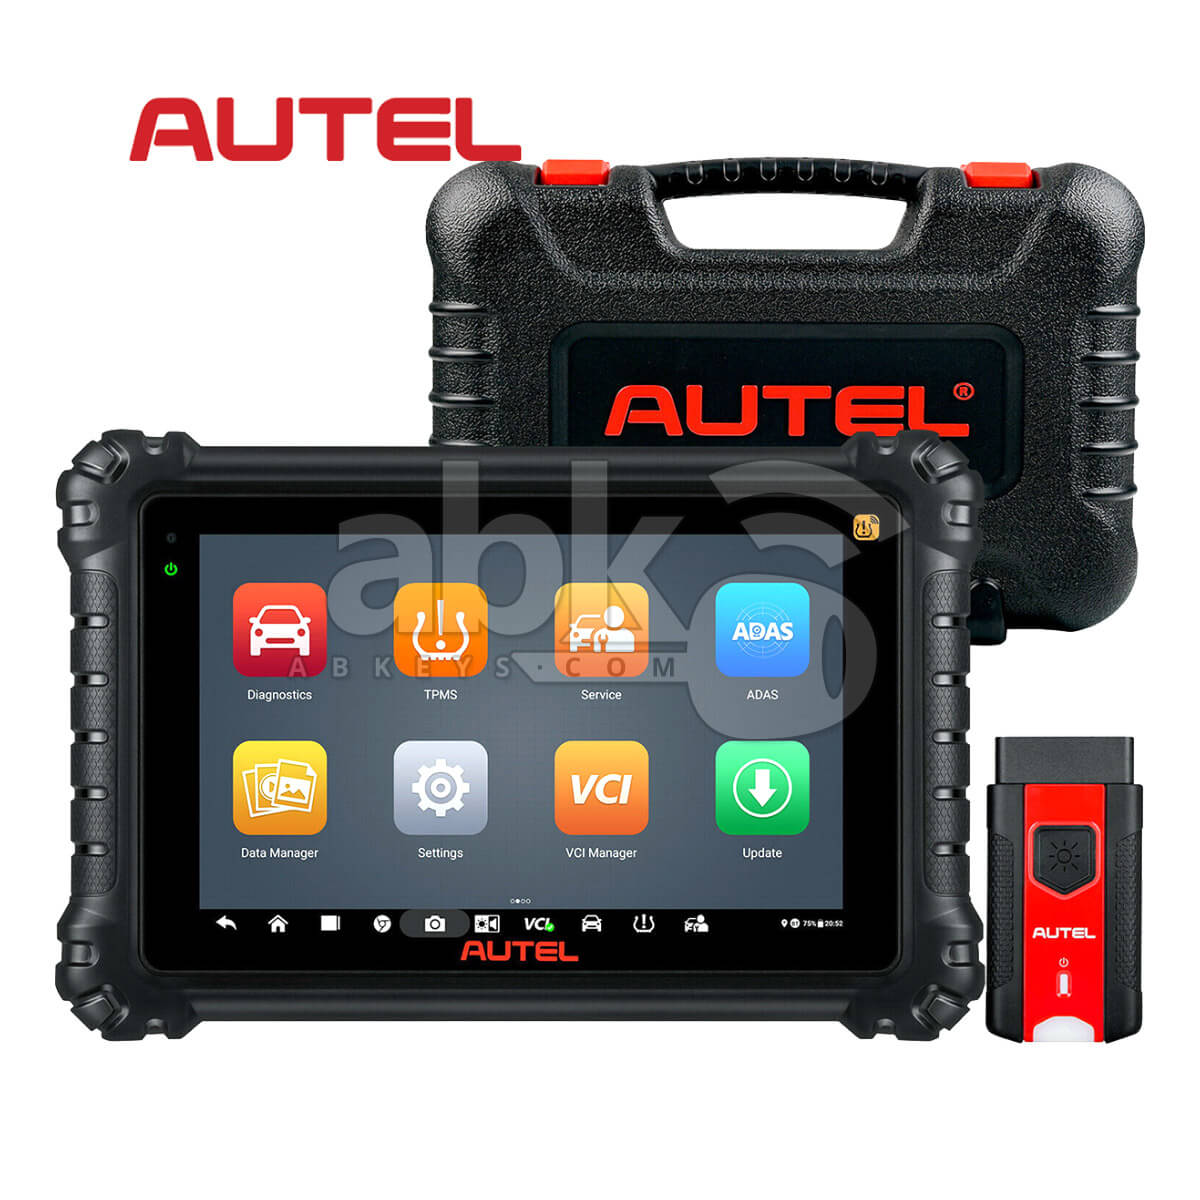 Autel MaxiSys MK906 Pro-TS Diagnostic Scan Tool 2024 Newer Model of MS906  Pro